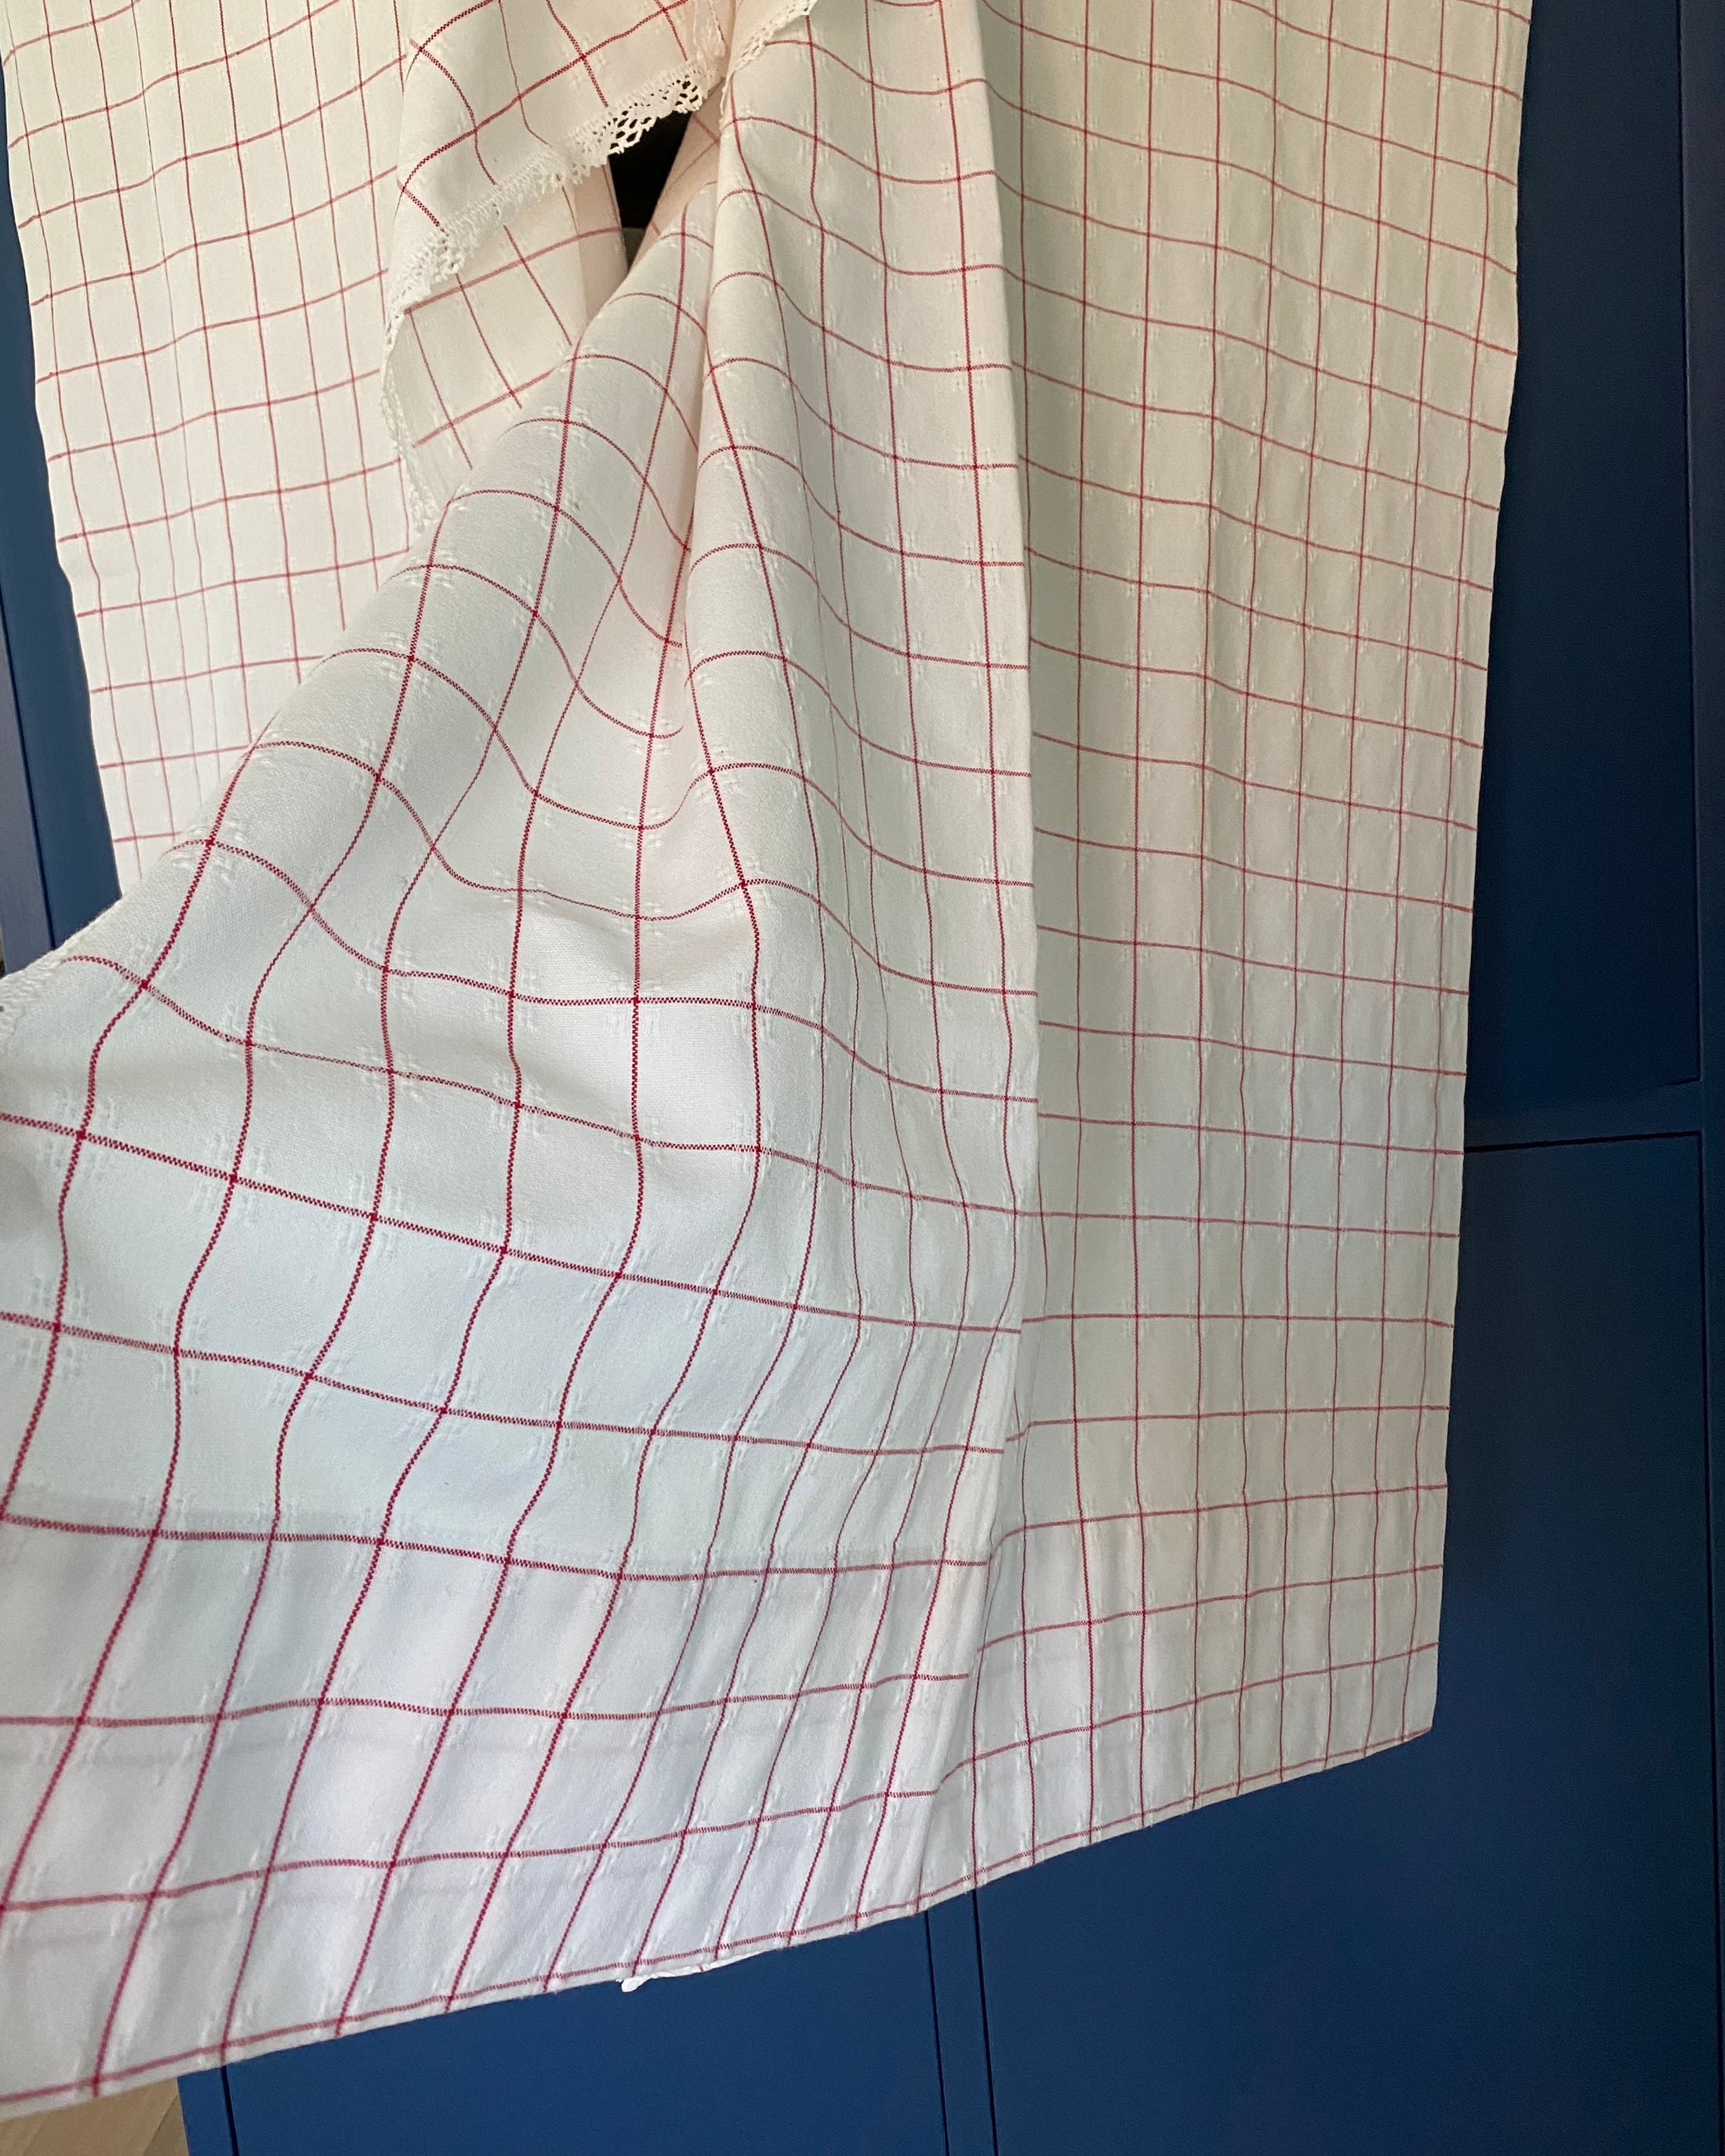 Pair of Vintage Checked Curtains in White and Red